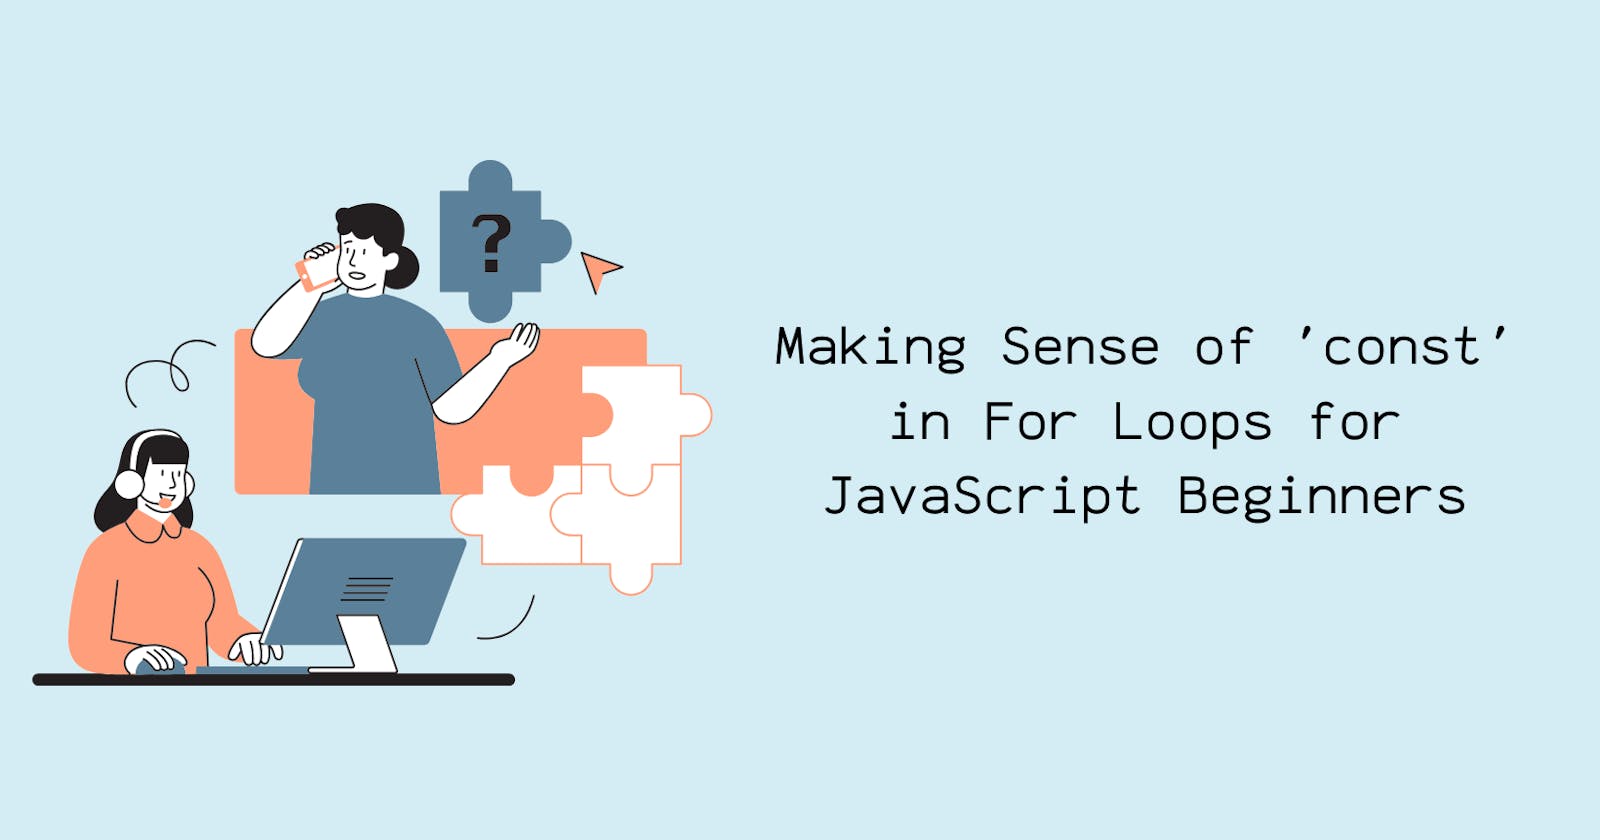 Making Sense of 'const' in For Loops for JavaScript Beginners